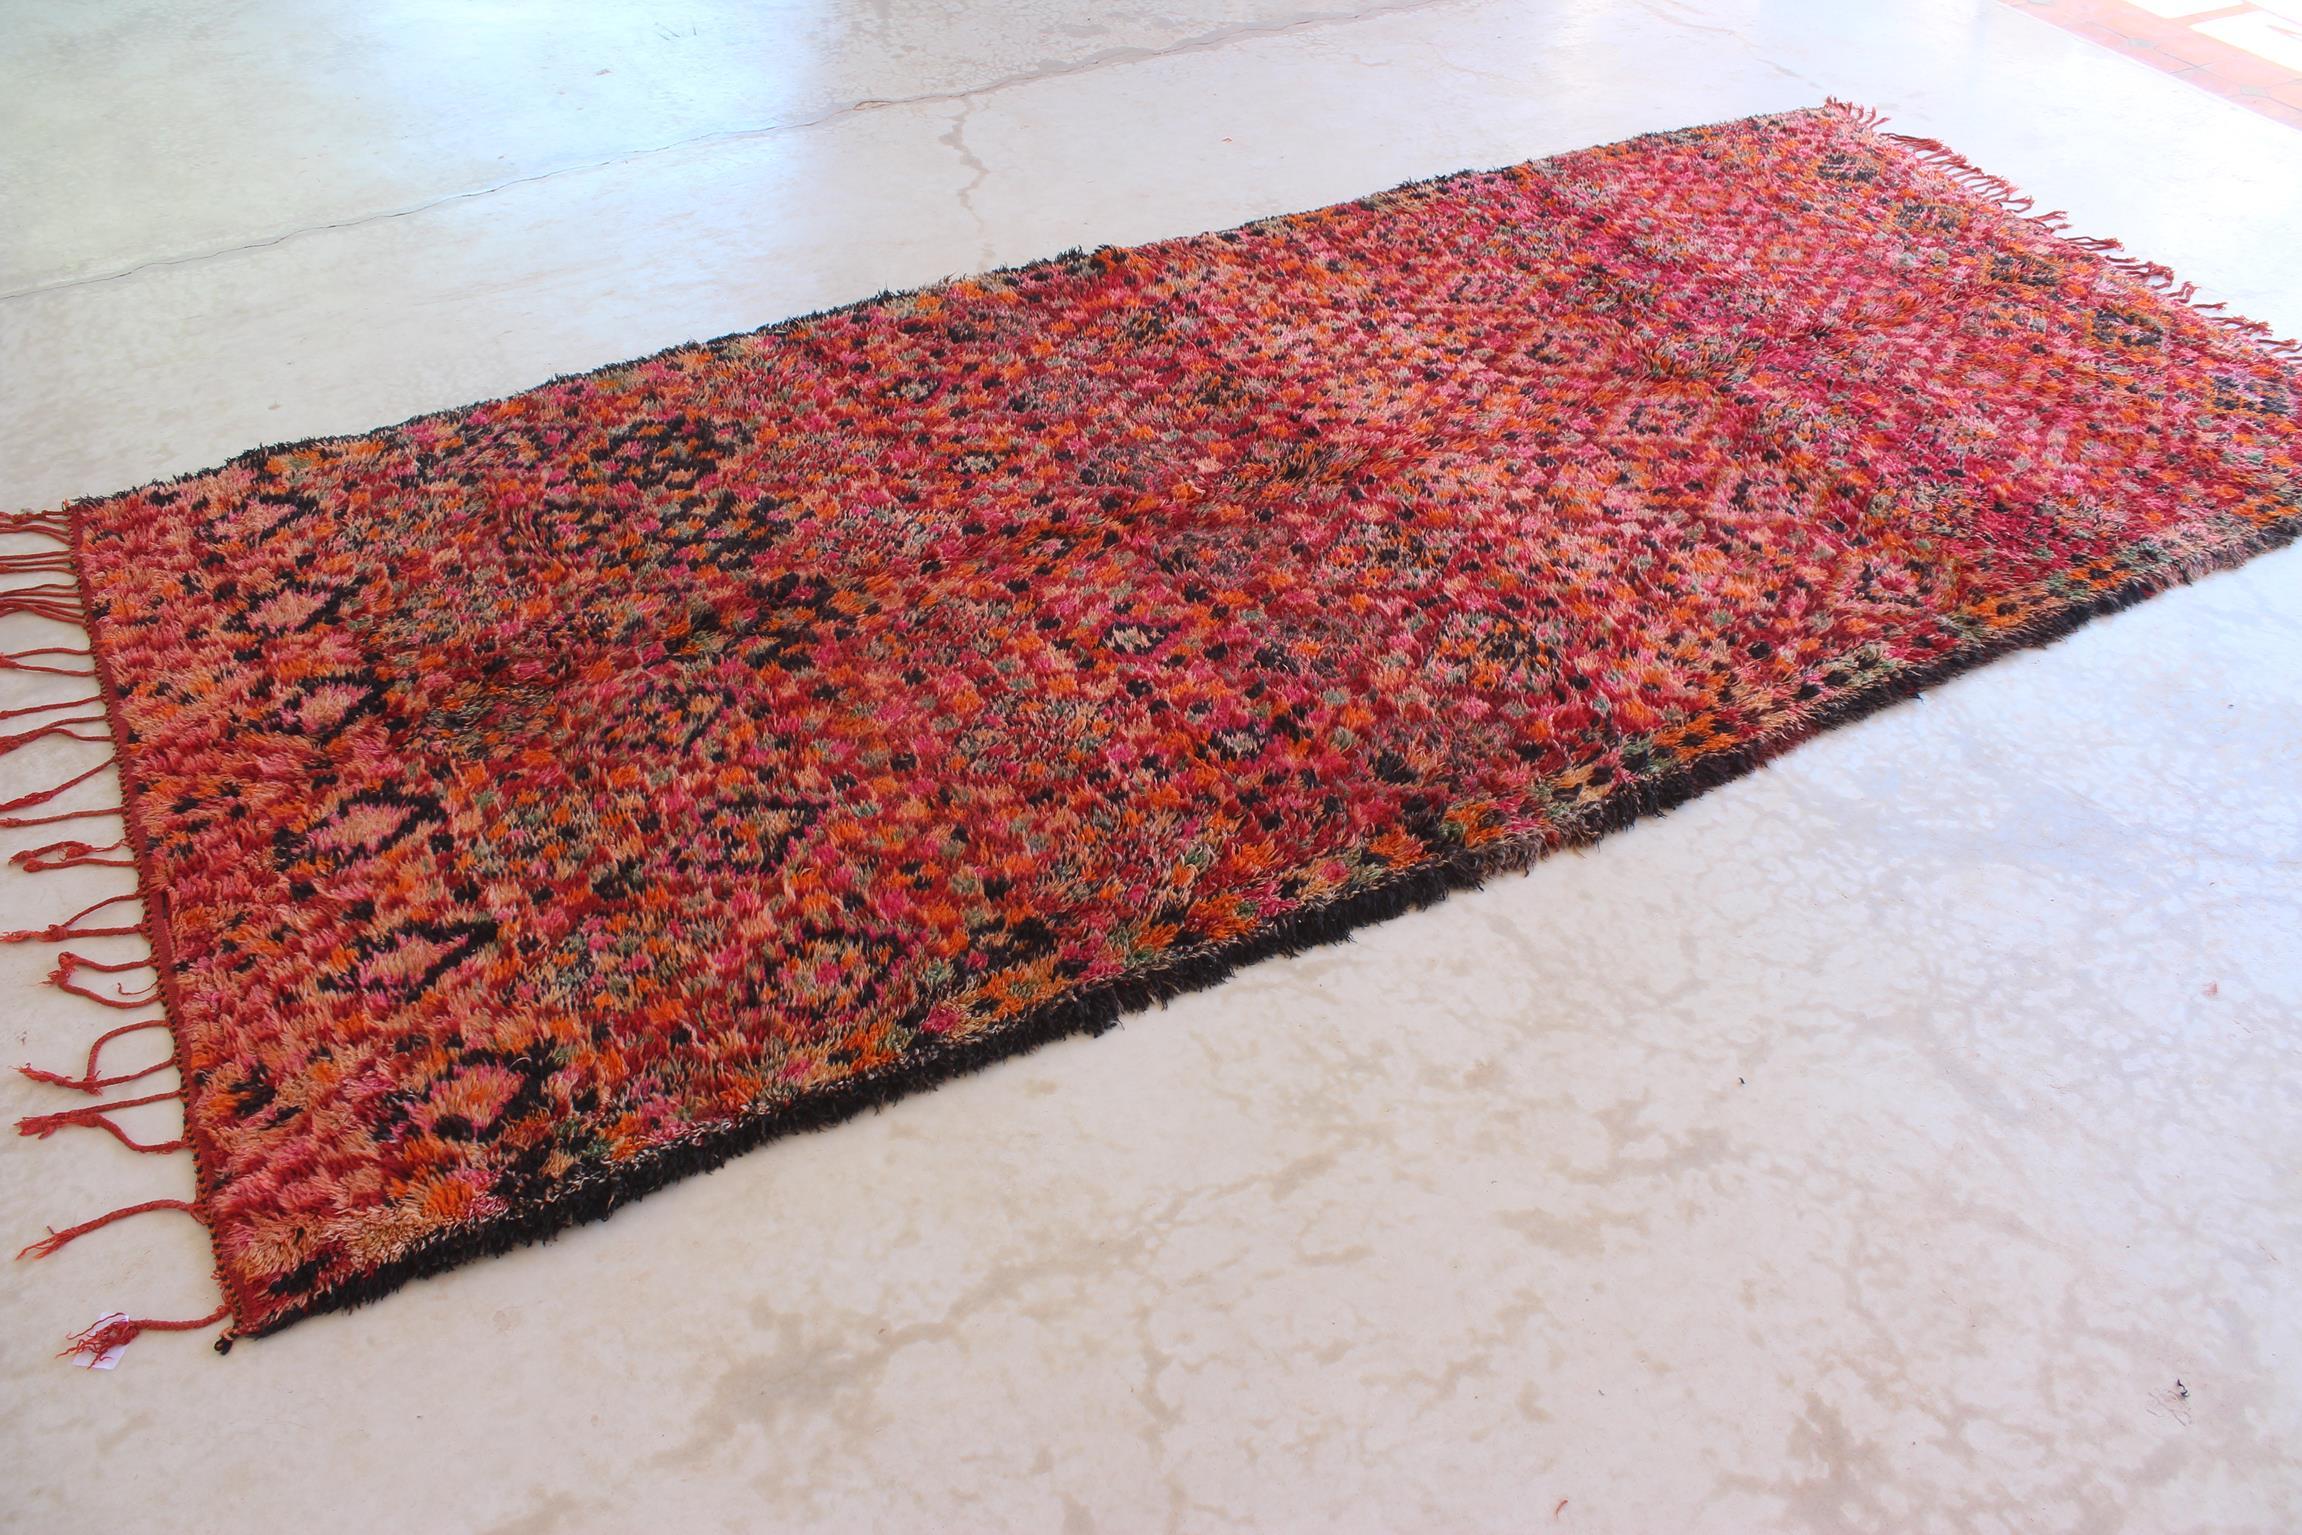 Vintage Moroccan Beni Mguild rug - Red - 6.5x14.3feet / 200x437cm In Good Condition For Sale In Marrakech, MA